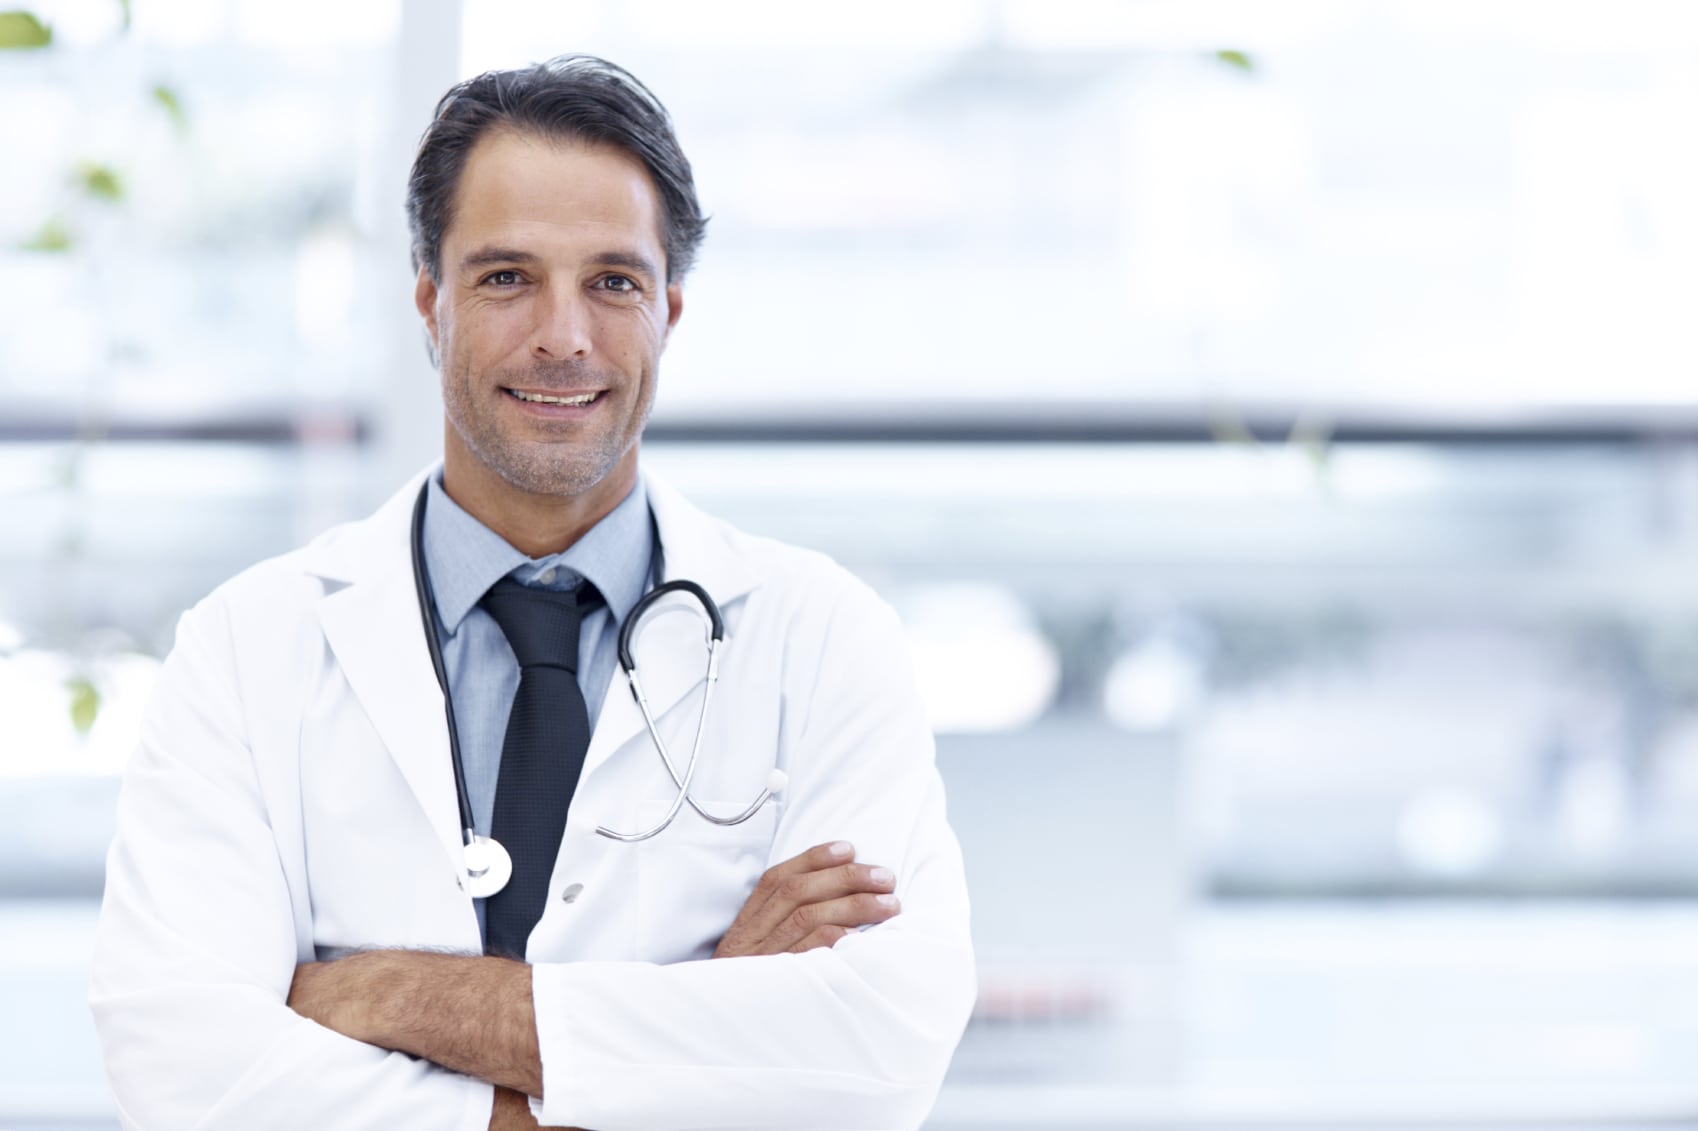 A handsome doctor standing with his arms folded and smiling at the camera - copyspace